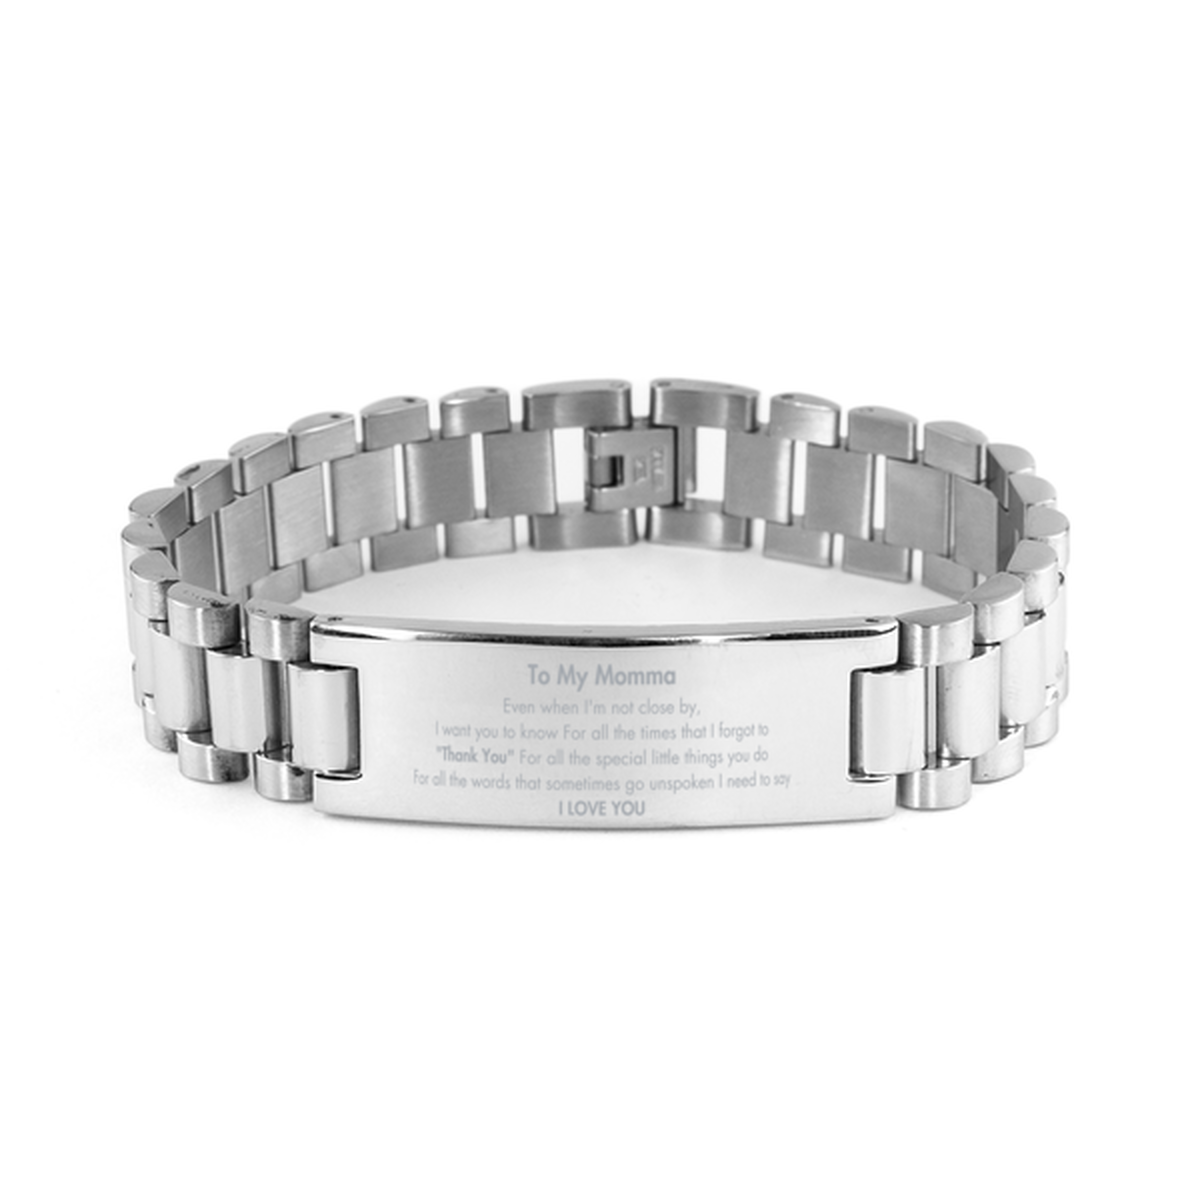 Thank You Gifts for Momma, Keepsake Ladder Stainless Steel Bracelet Gifts for Momma Birthday Mother's day Father's Day Momma For all the words That sometimes go unspoken I need to say I LOVE YOU